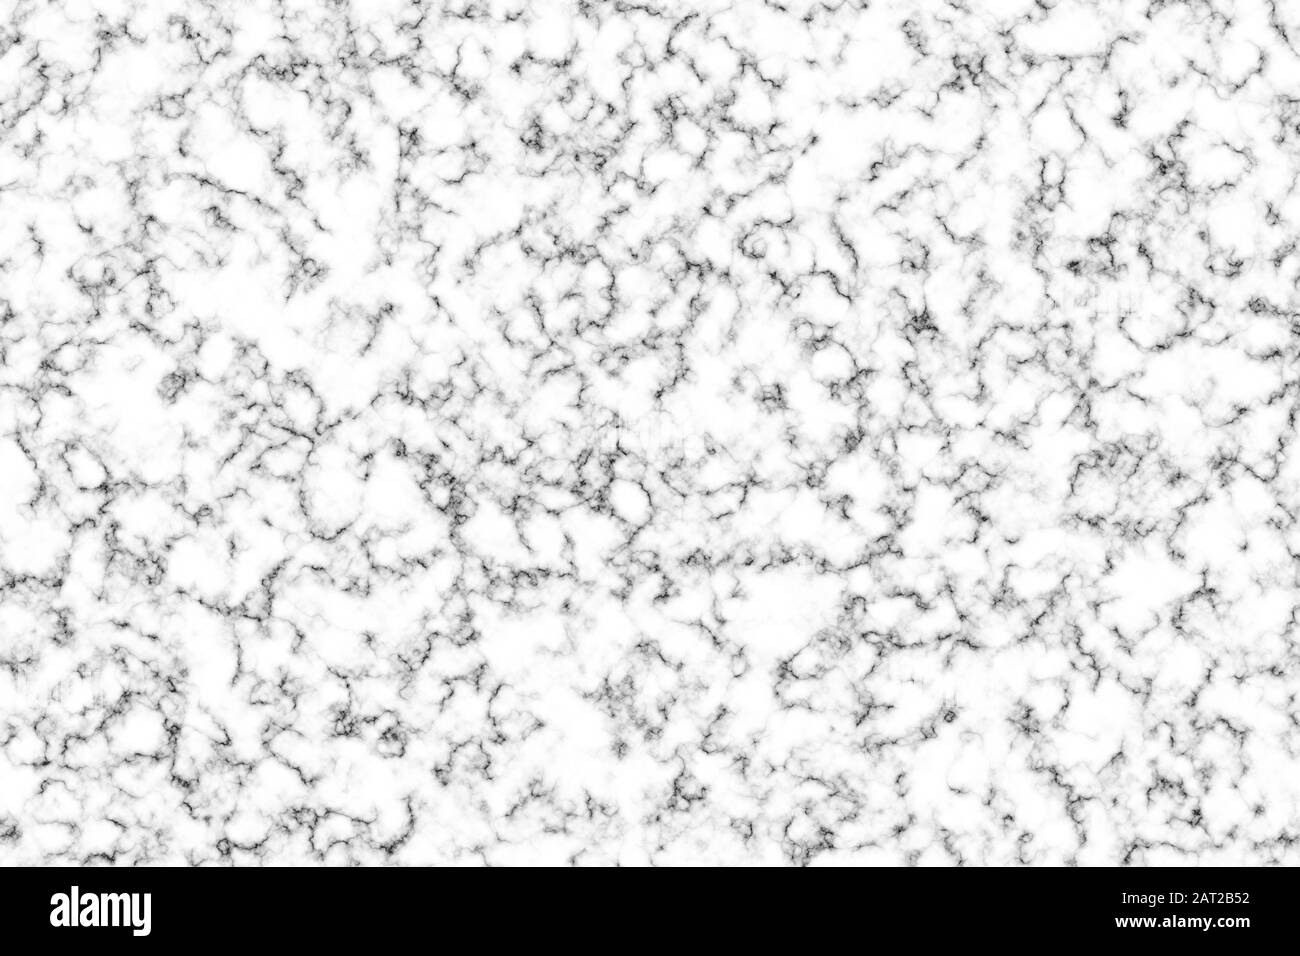 White marble used to make black textured pattern background. Stock Photo